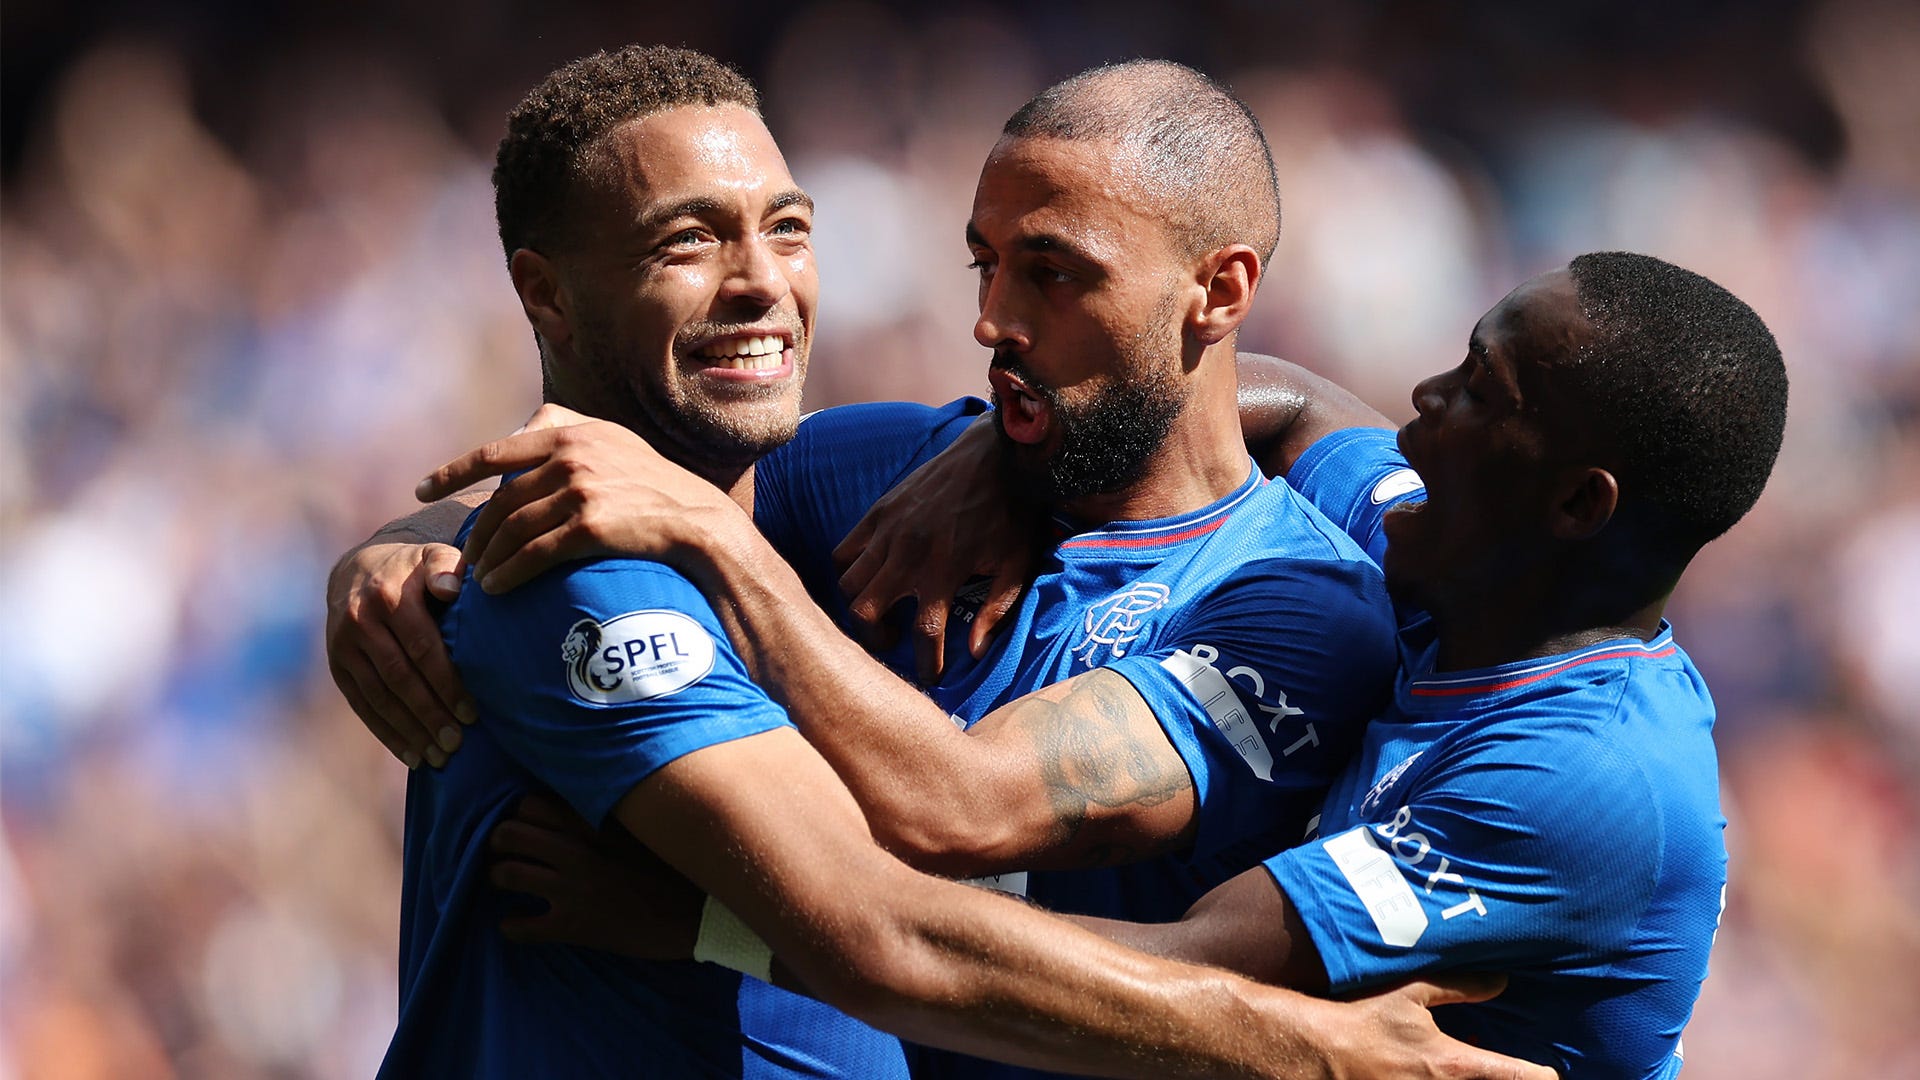 Rangers vs Livingston Where to watch the match online, live stream, TV channels, and kick-off time Goal US